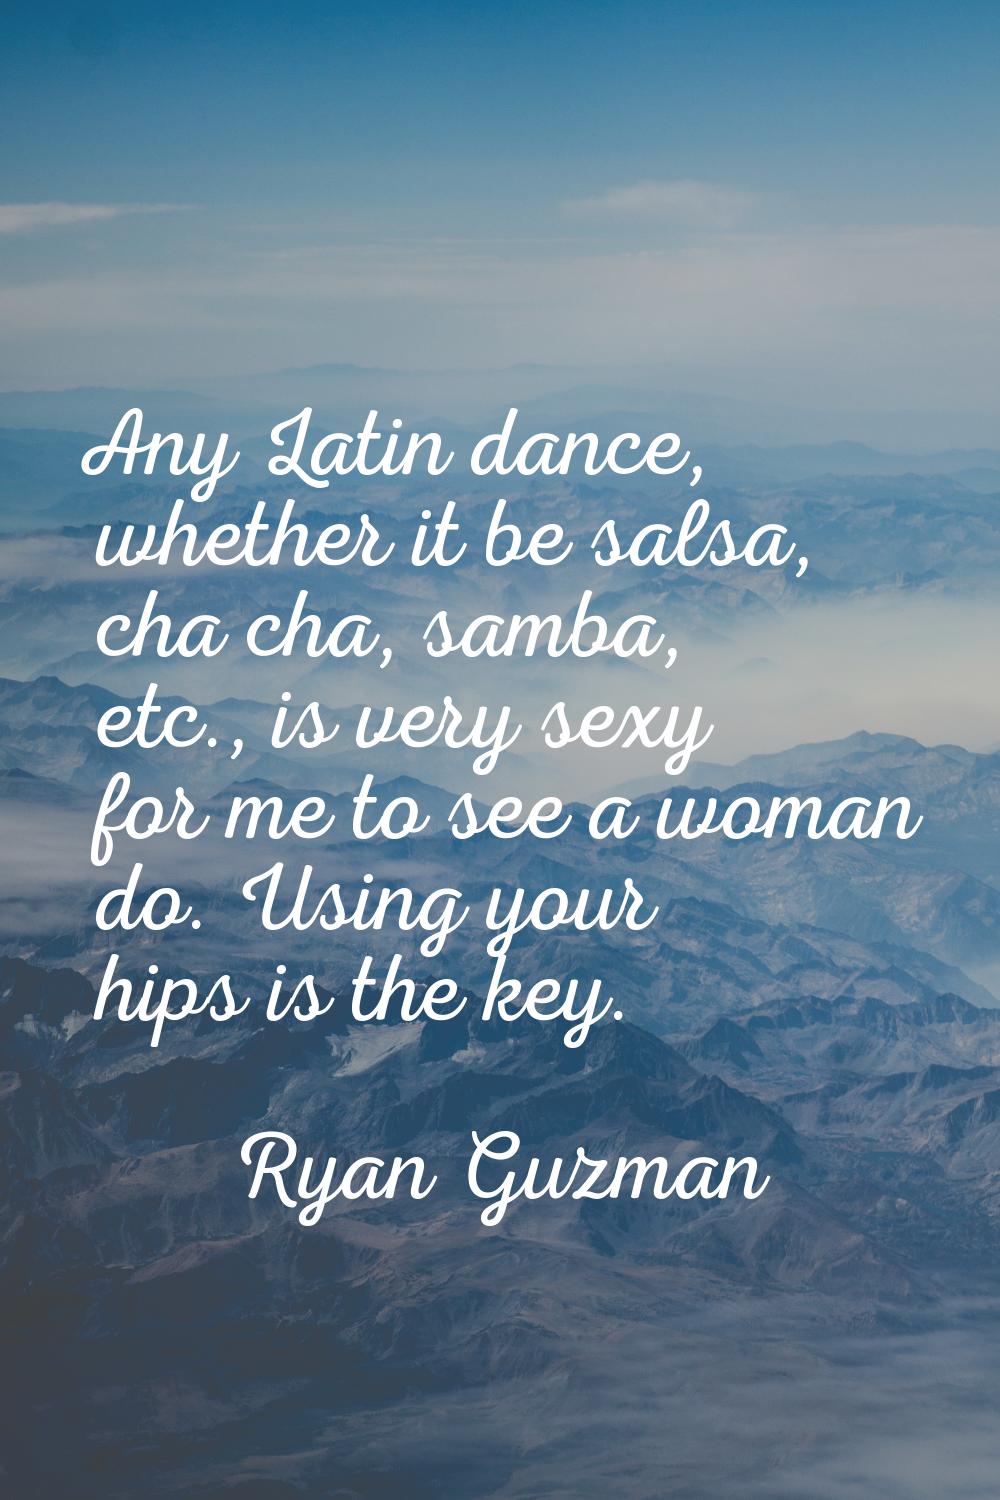 Any Latin dance, whether it be salsa, cha cha, samba, etc., is very sexy for me to see a woman do. 